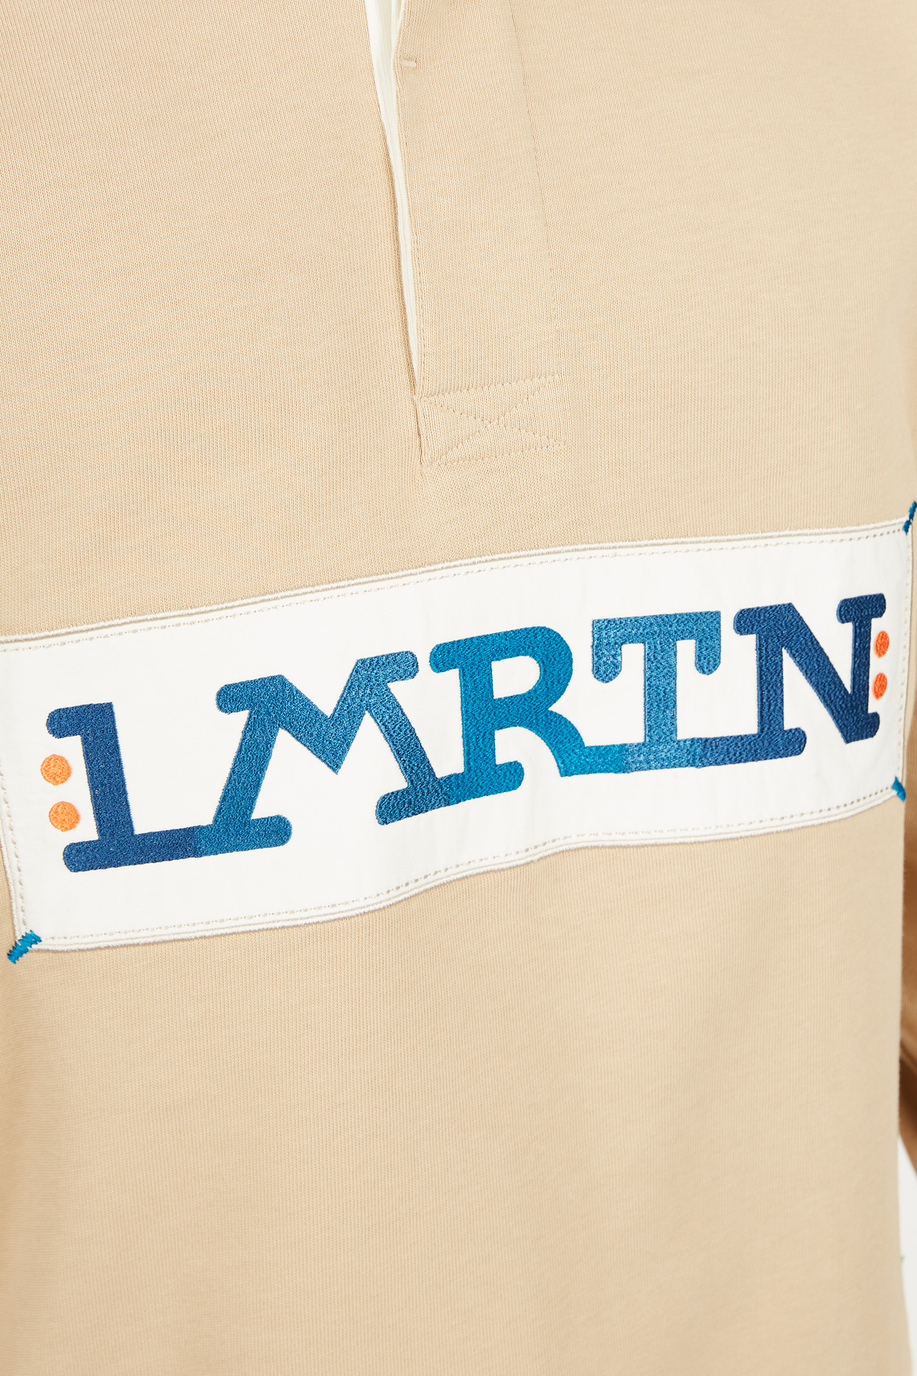 Short-sleeved polo shirt in 100% cotton, oversized fit - LMRTN | La Martina - Official Online Shop